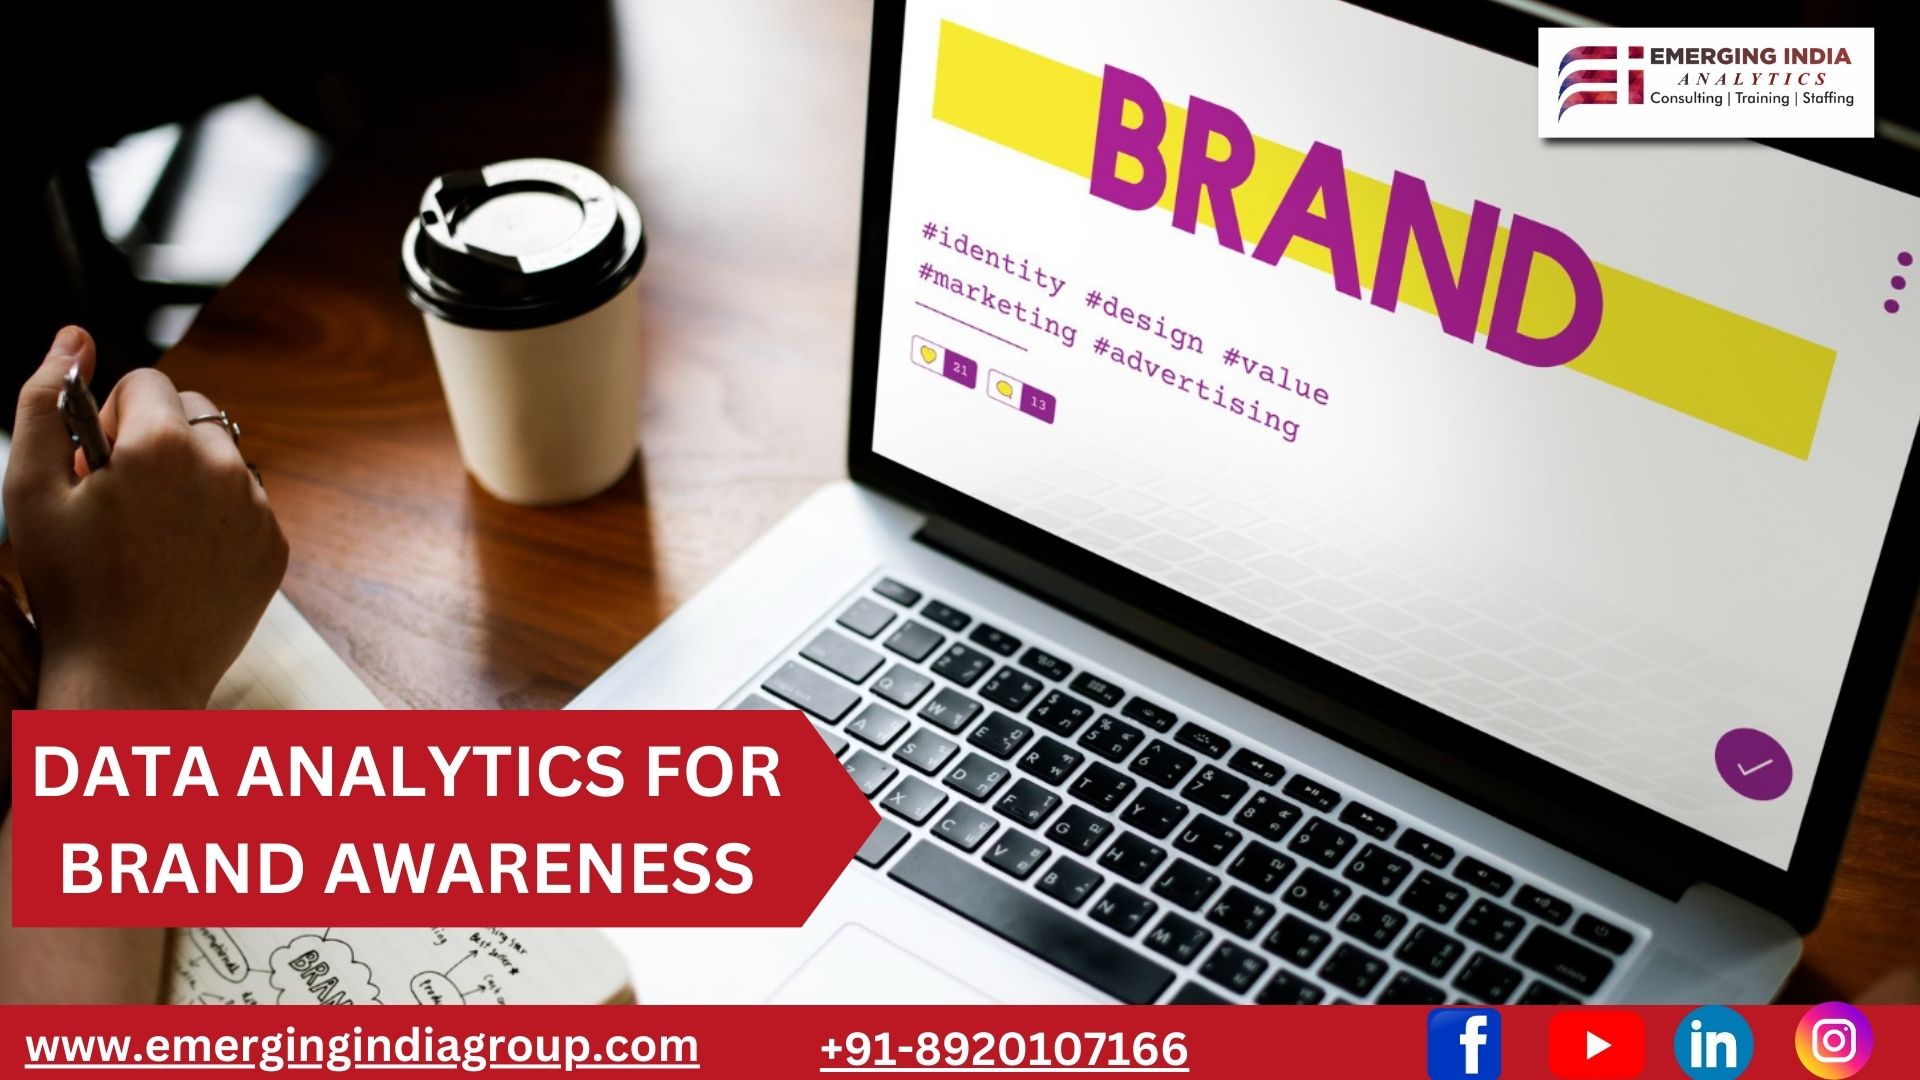 The image illustrate the importance of data analytics for brand awareness